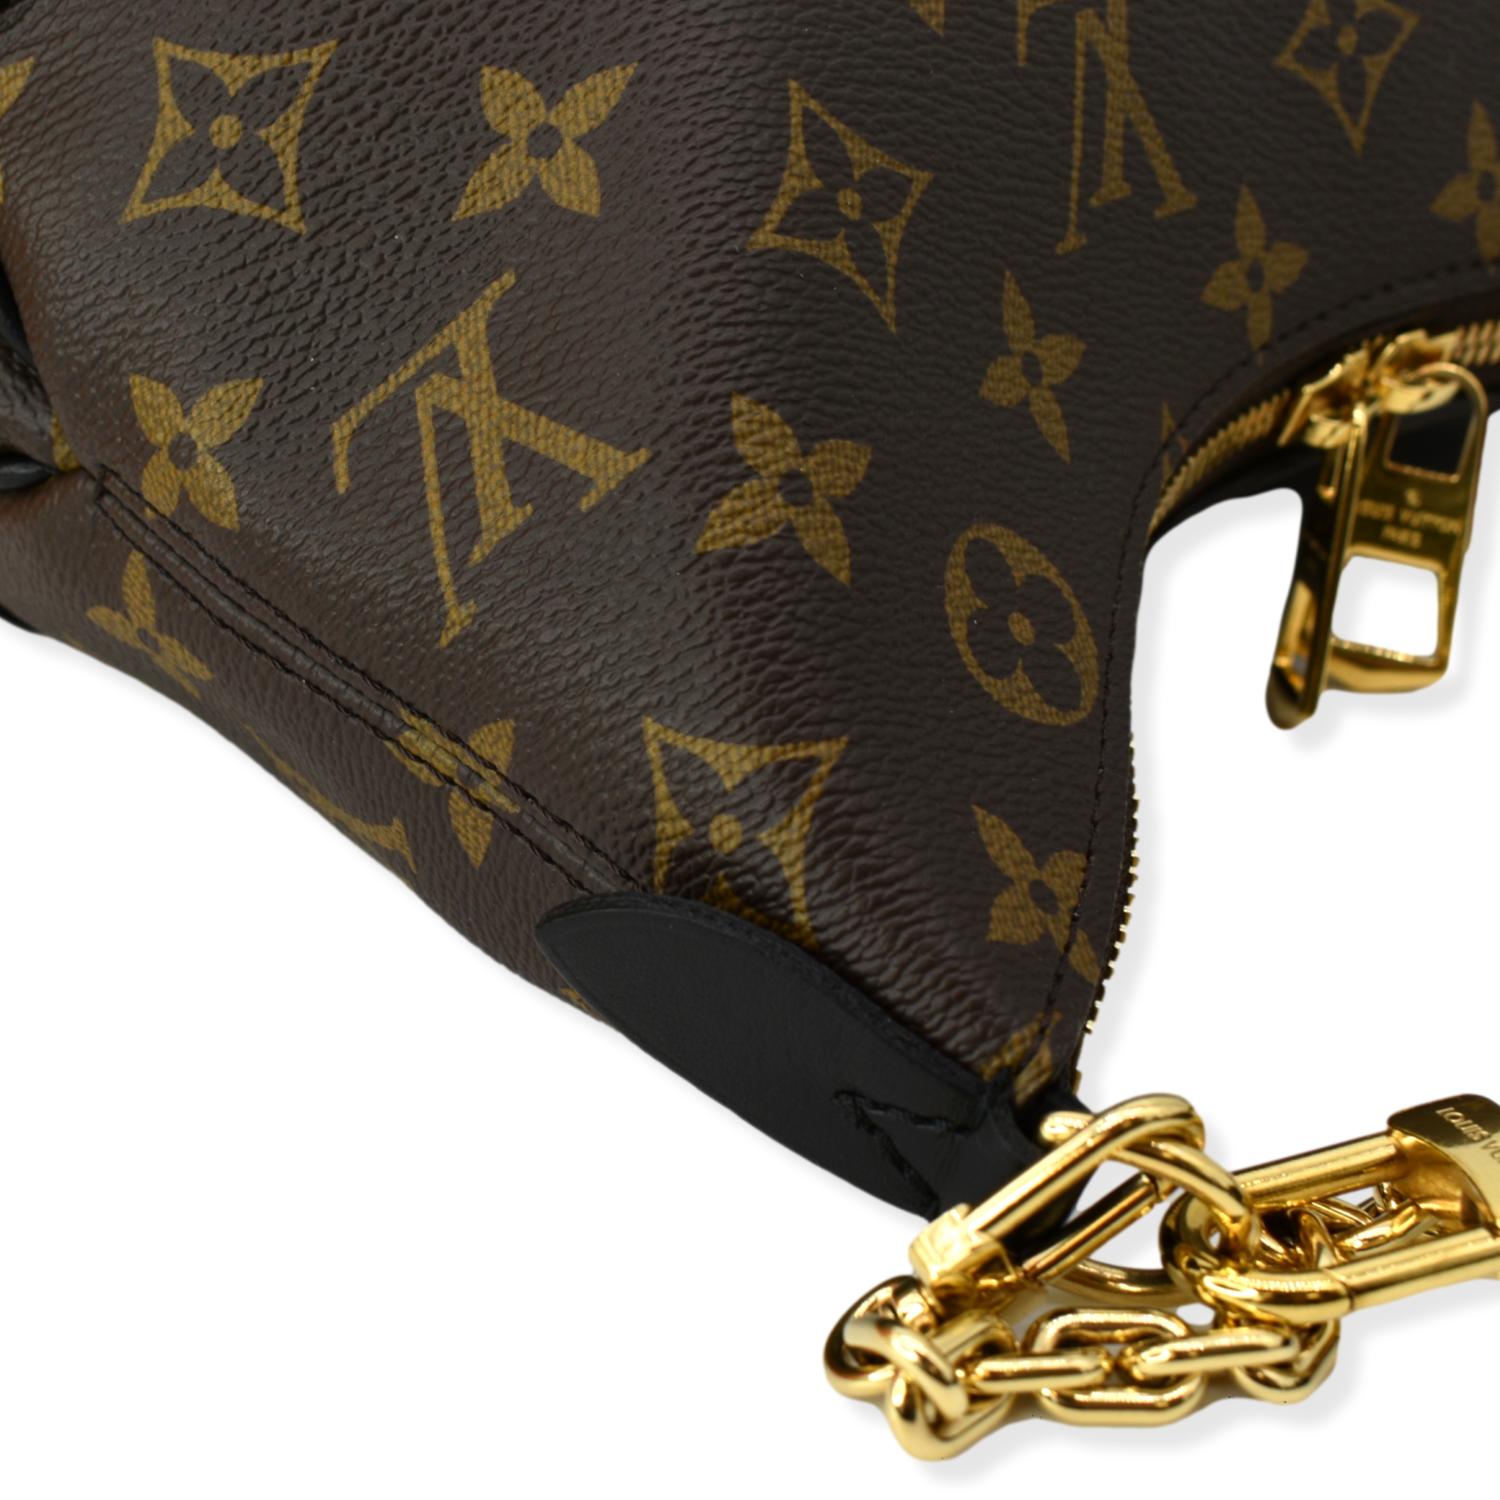 Louis Vuitton, Bags, Louis Vuitton Boulogne Bag With Gold Chain And Black  Leather Strap